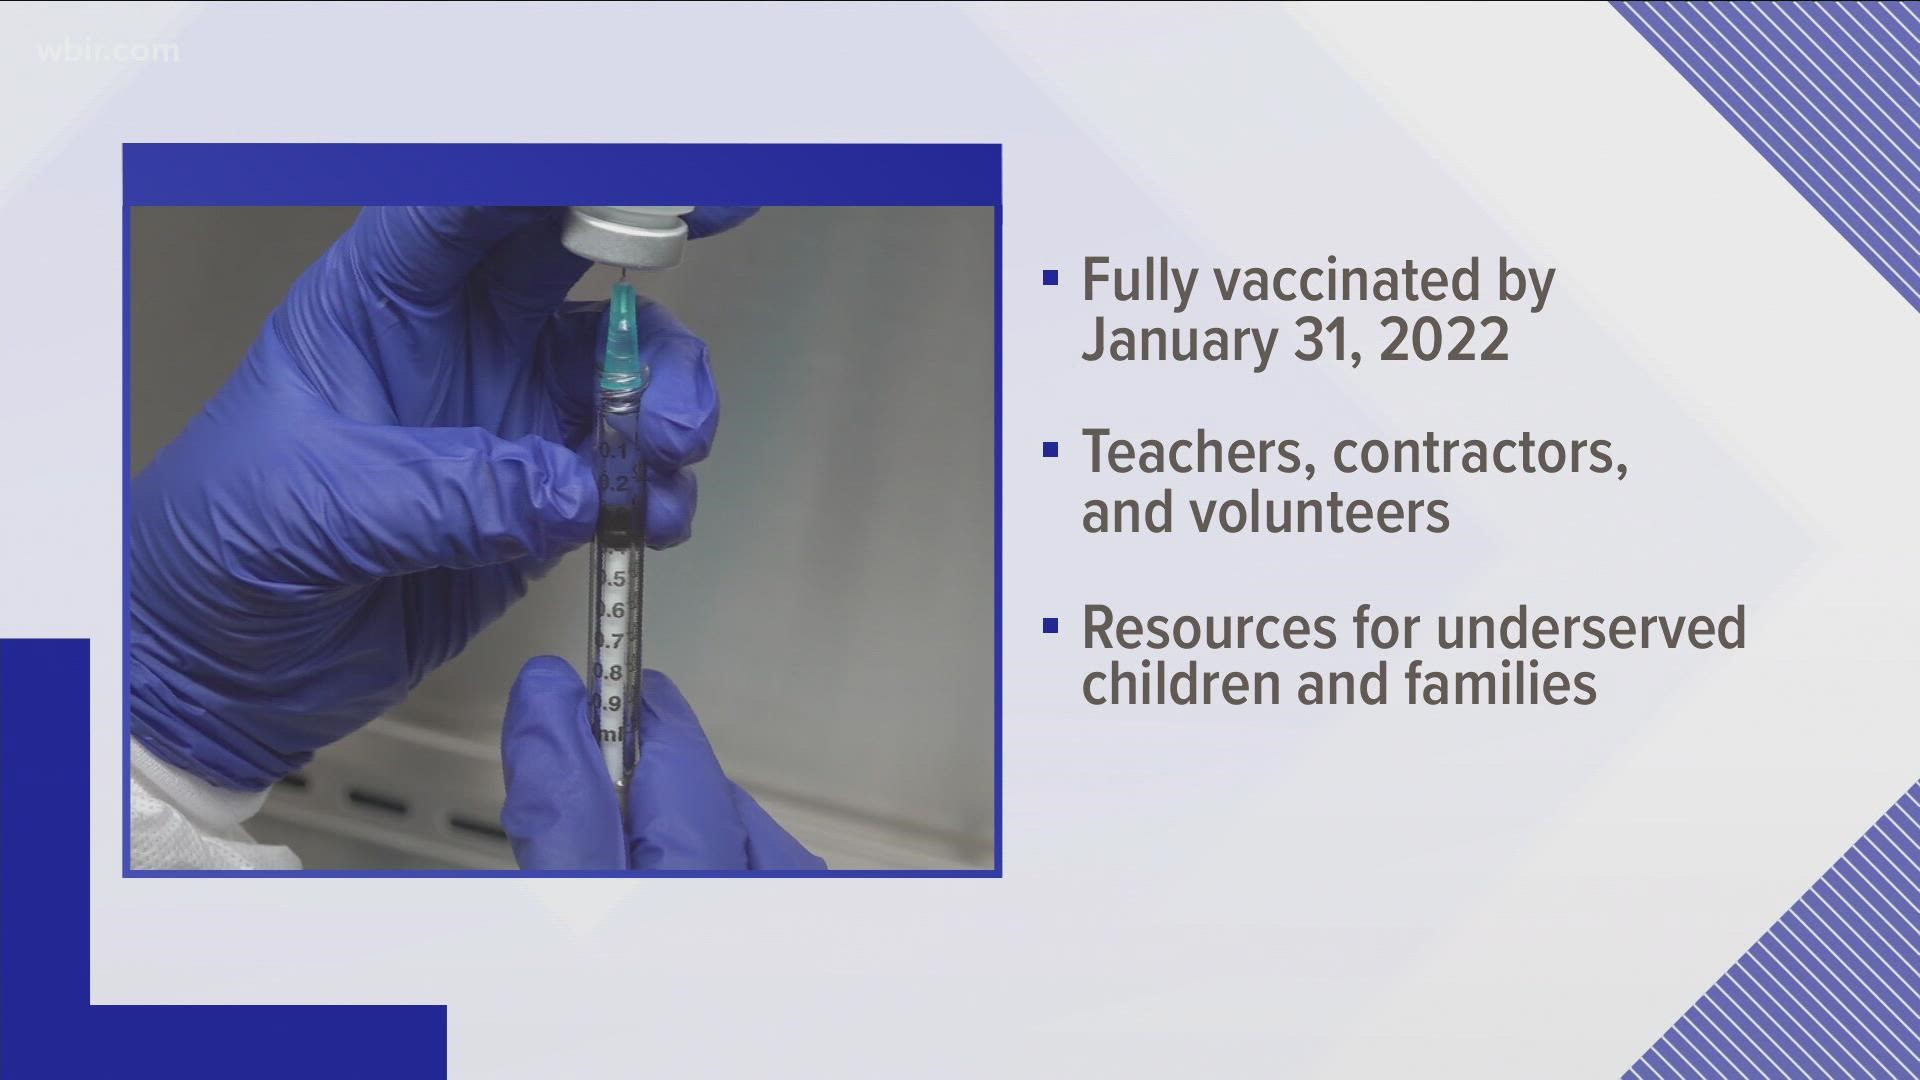 Attorney General Herbert H. Slatery III said that he felt deciding whether to require vaccinations should be left up to the state.